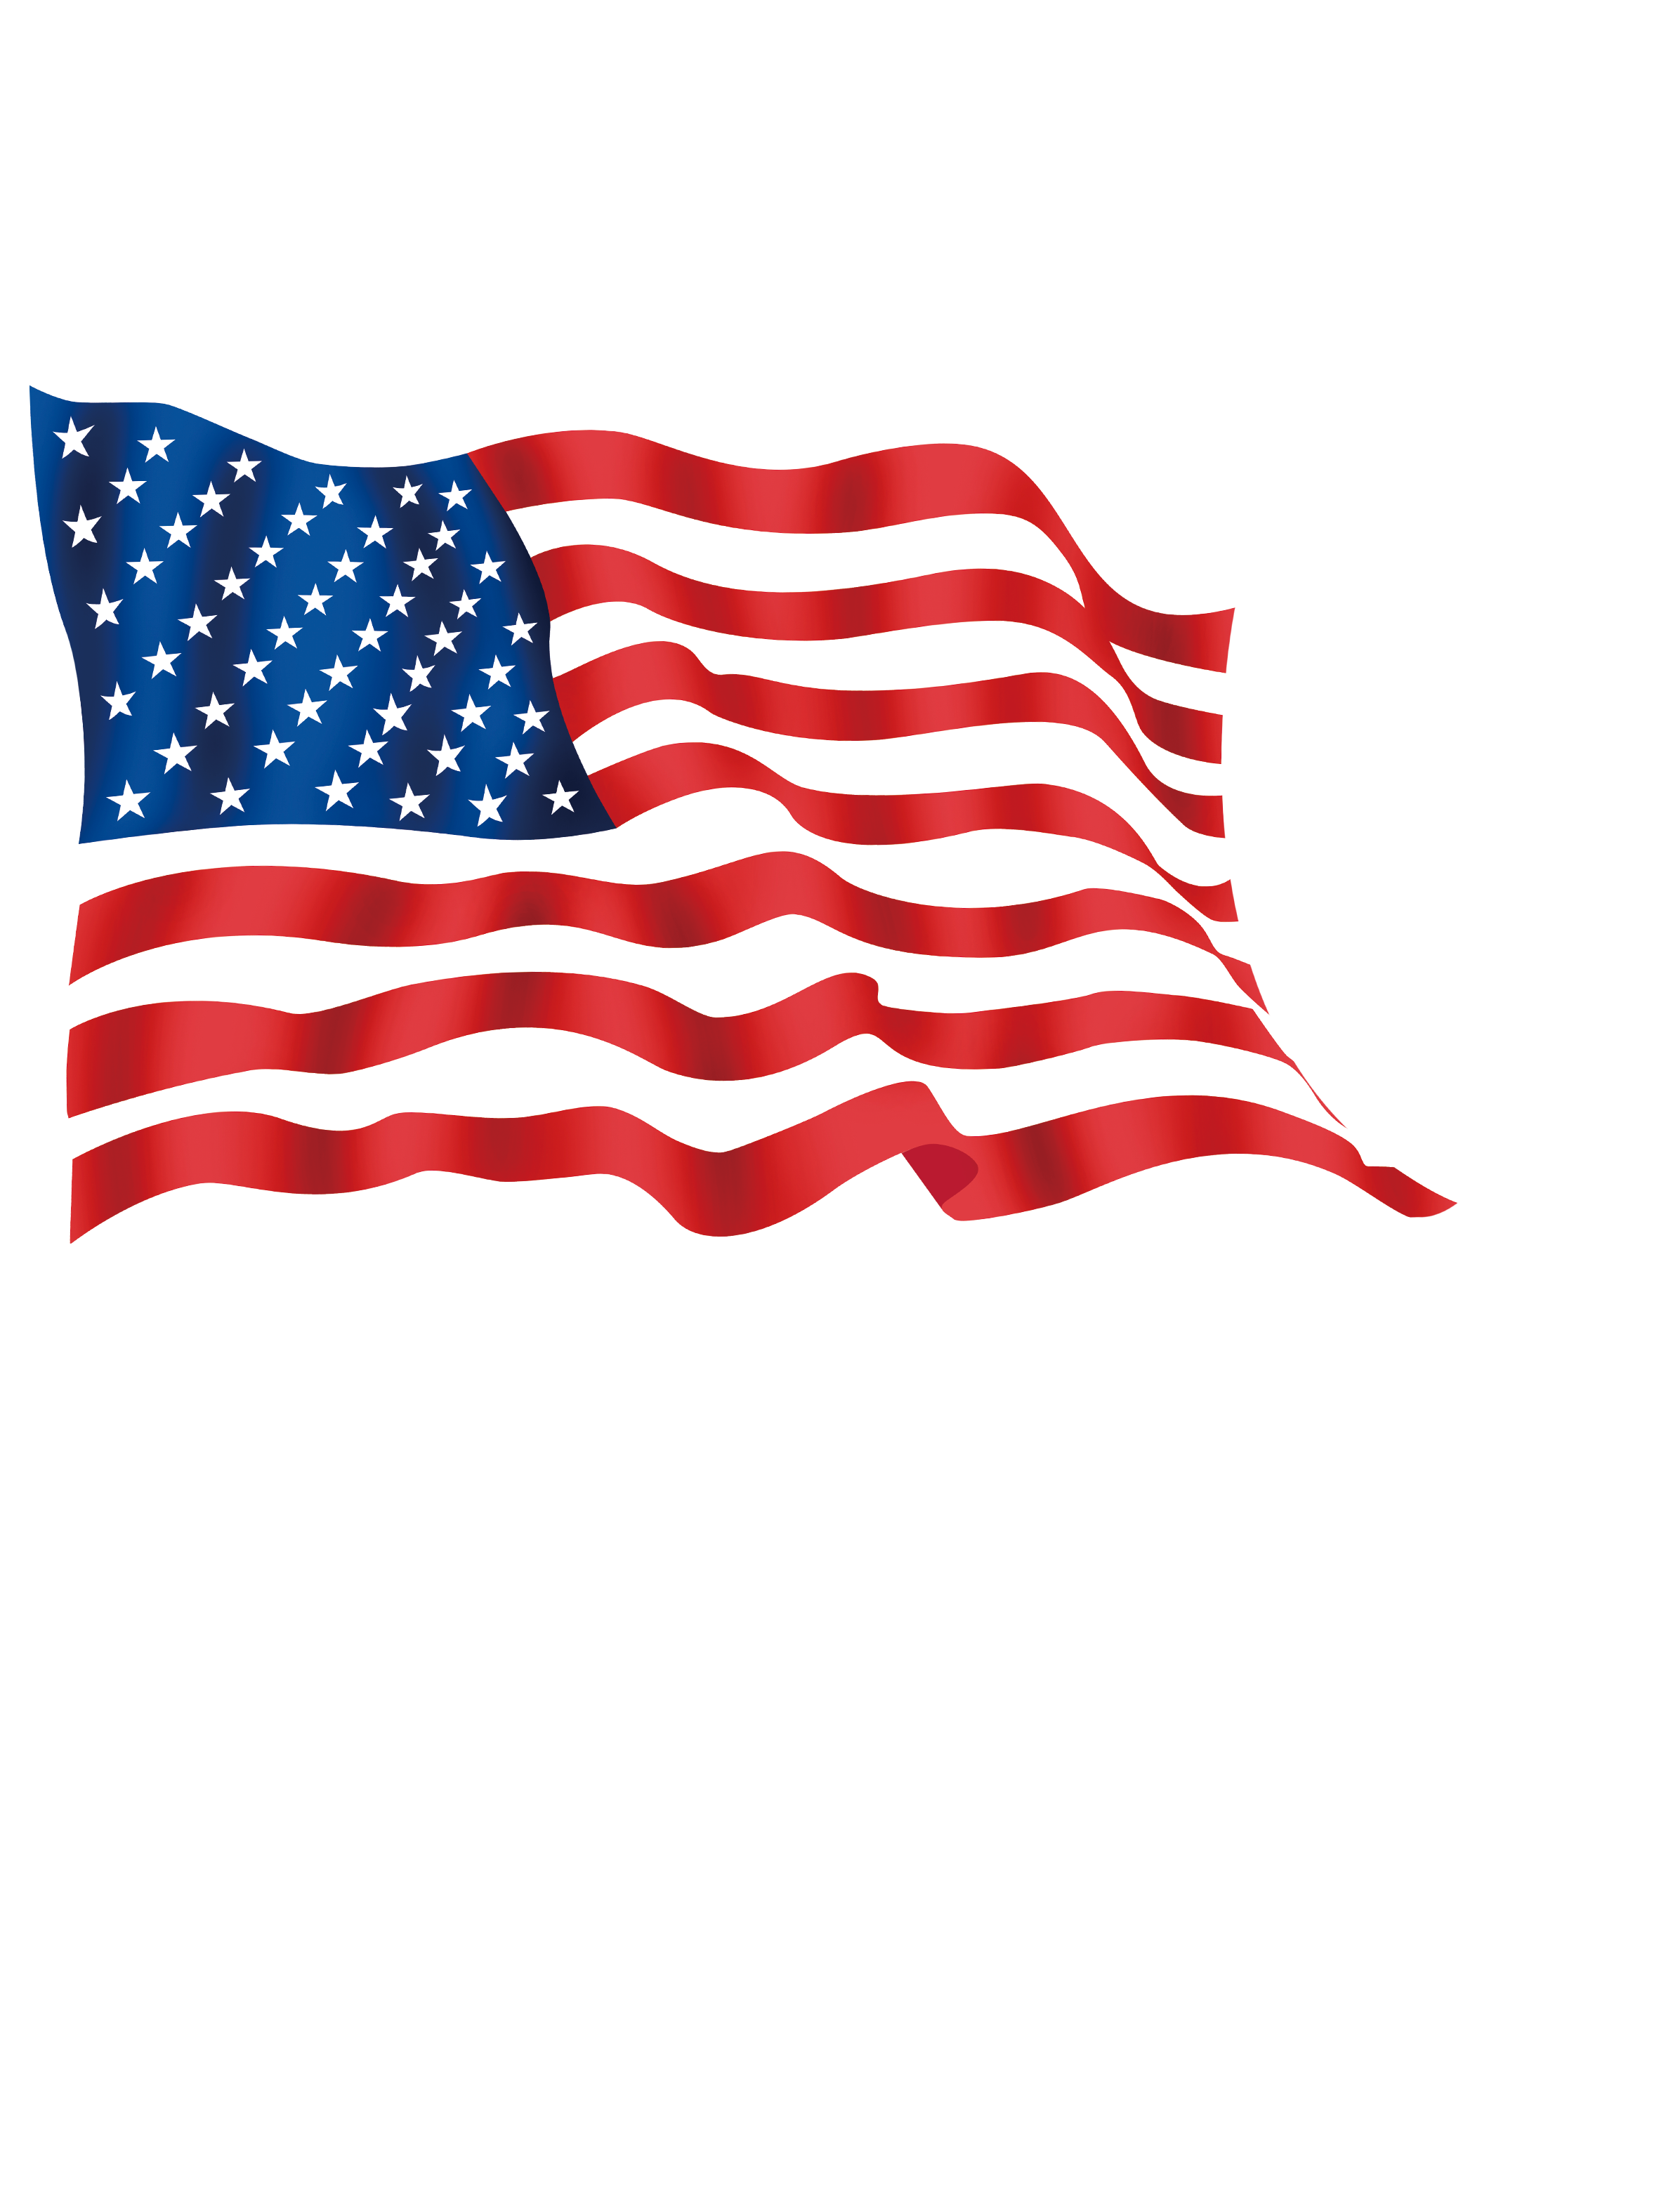 Usa Flag Png America Flag Png Usa Flag America Flag Flag Usa Png Transparent Clipart Image And Psd File For Free Download Usa Flag America Flag Flag